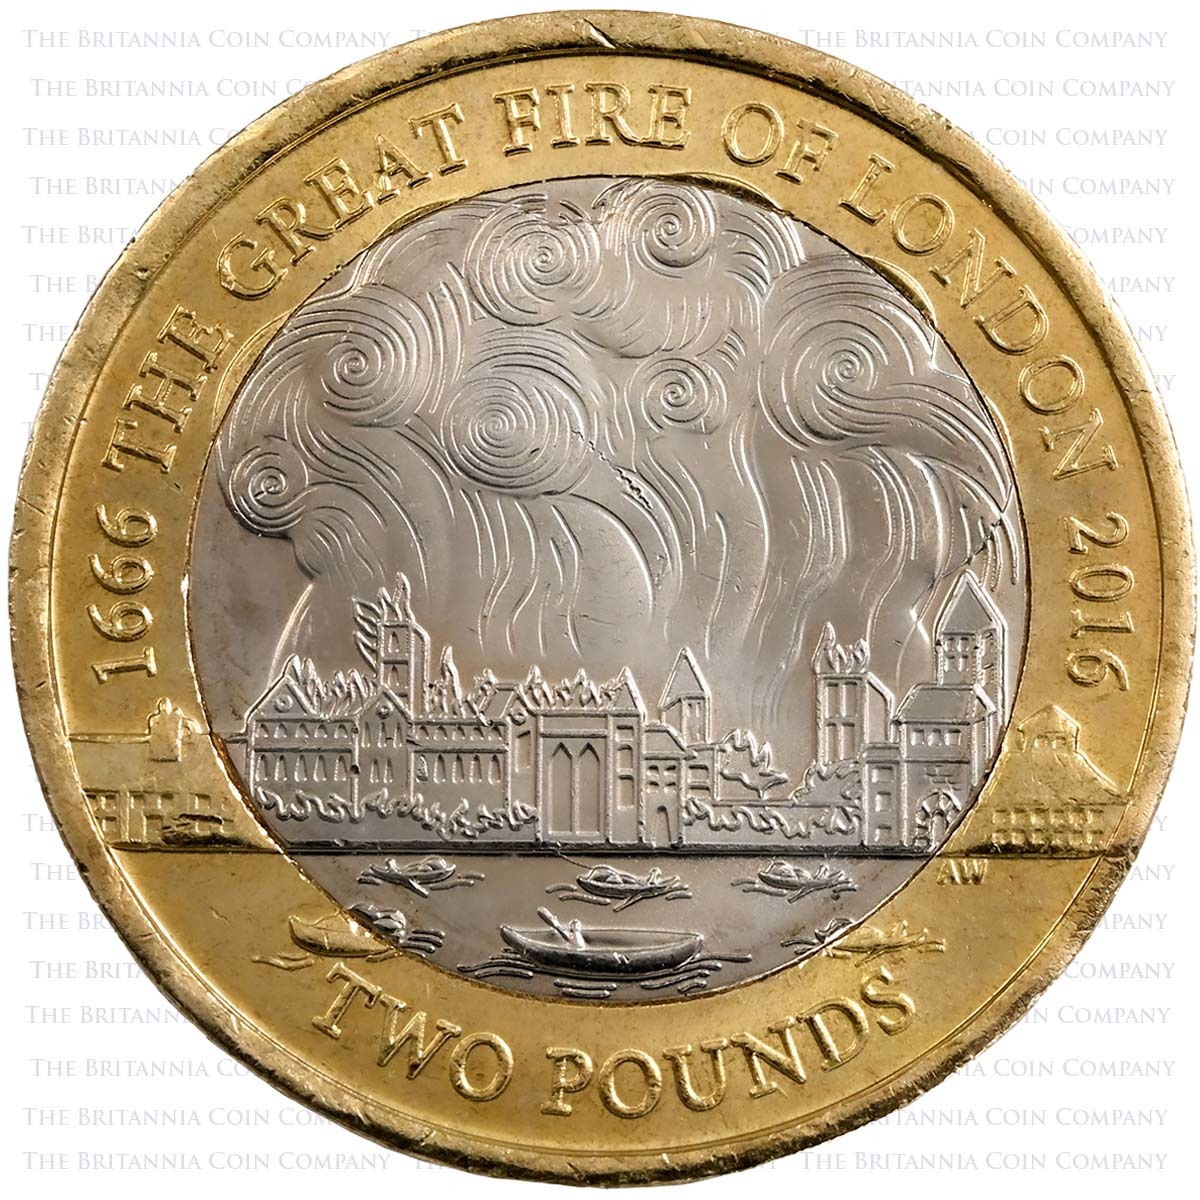 2016 Great Fire Of London 1666 Circulated Two Pound Coin Reverse